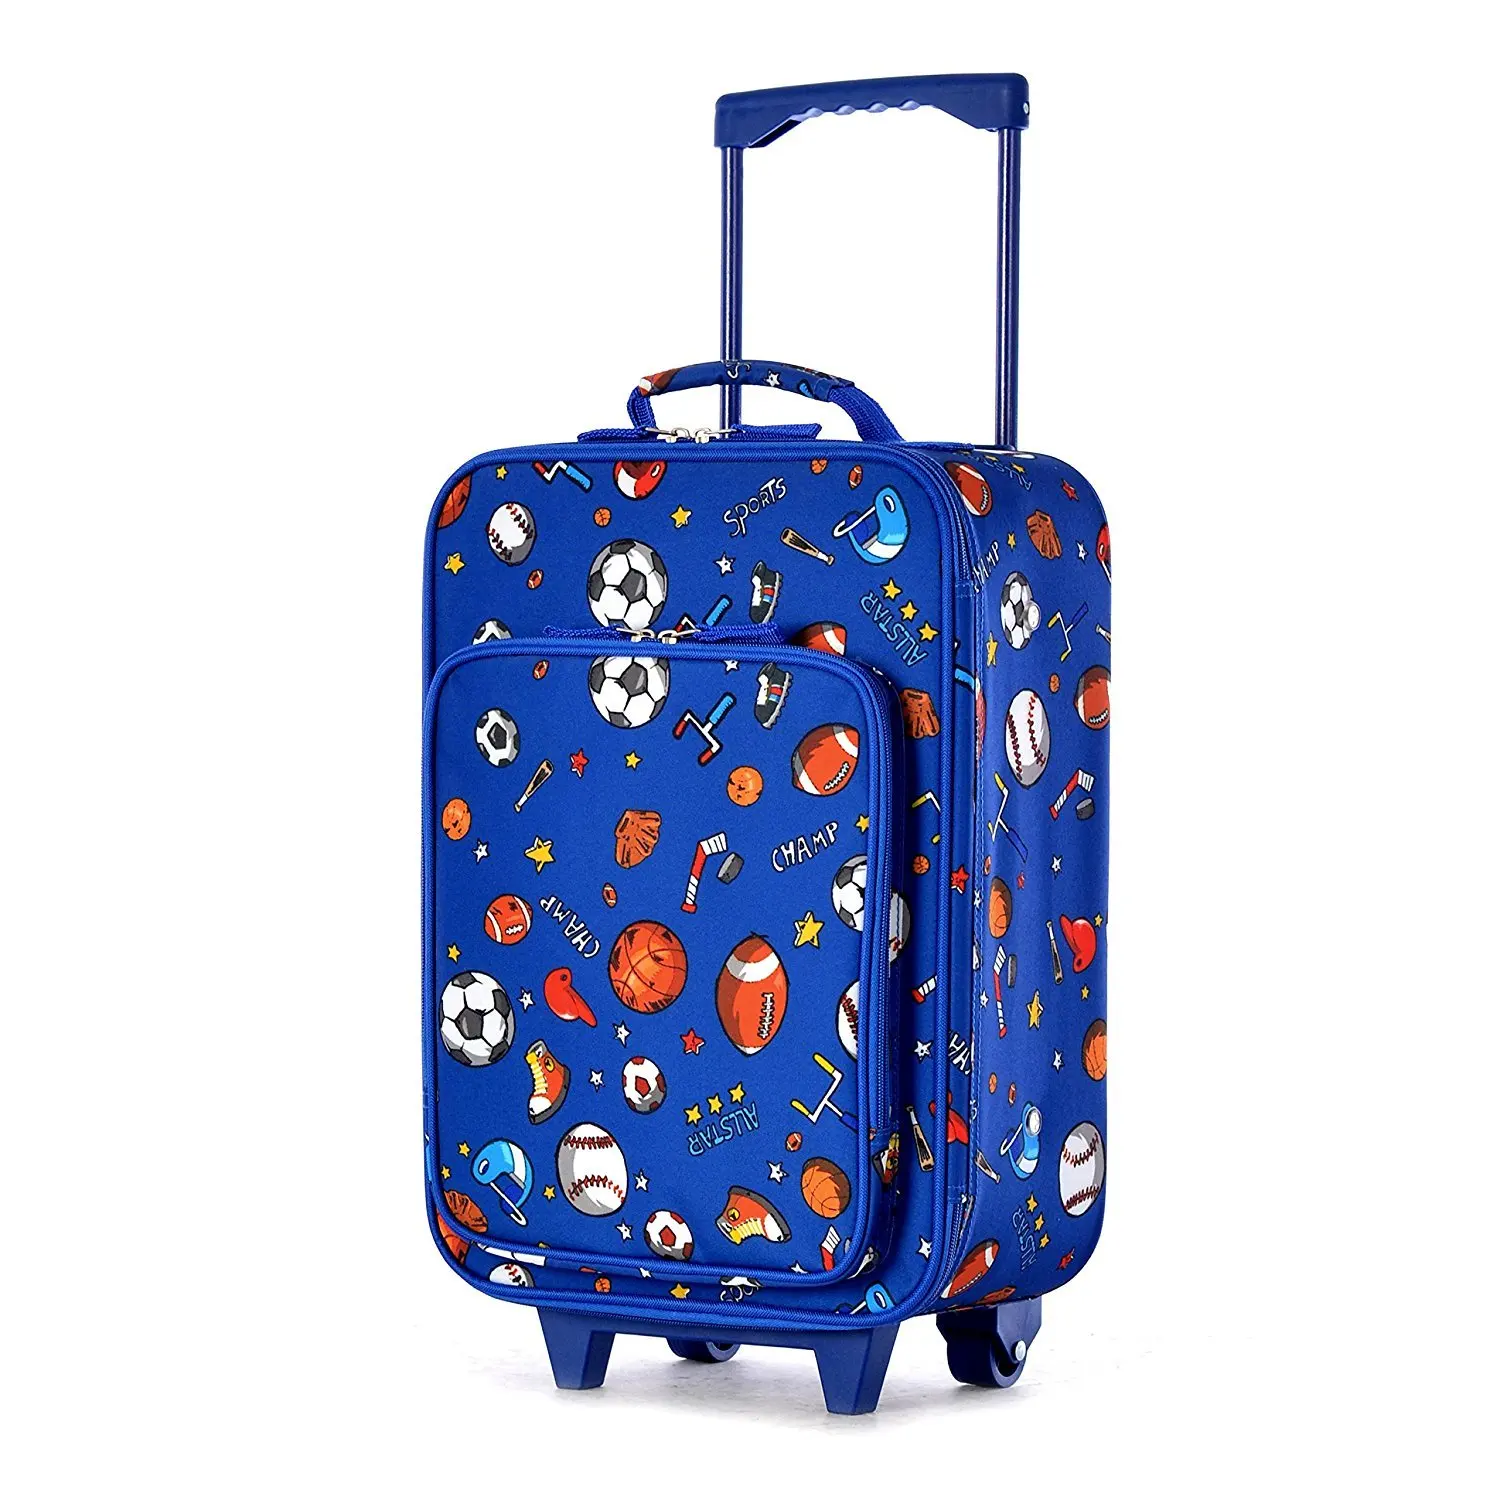 Cheap Lightweight Luggage With Wheels, find Lightweight Luggage With Wheels deals on line at ...